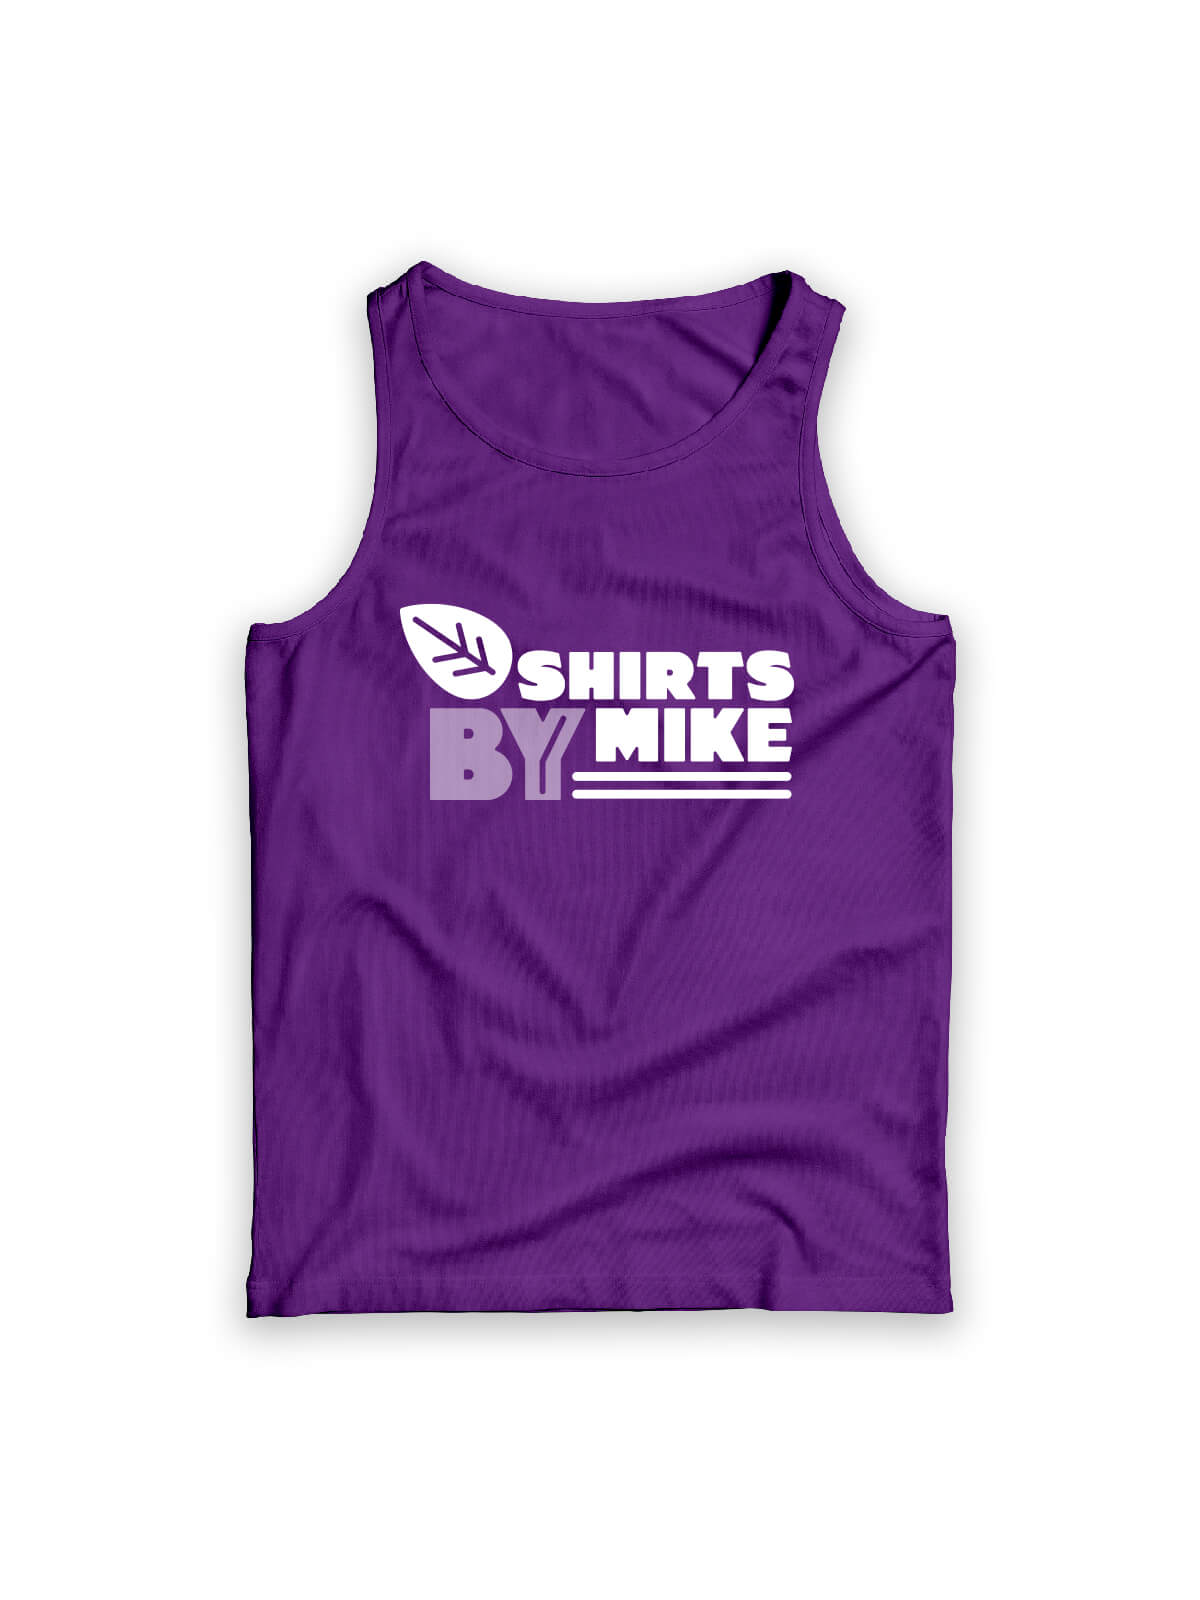 purple tank top with Shirts By Mike logo